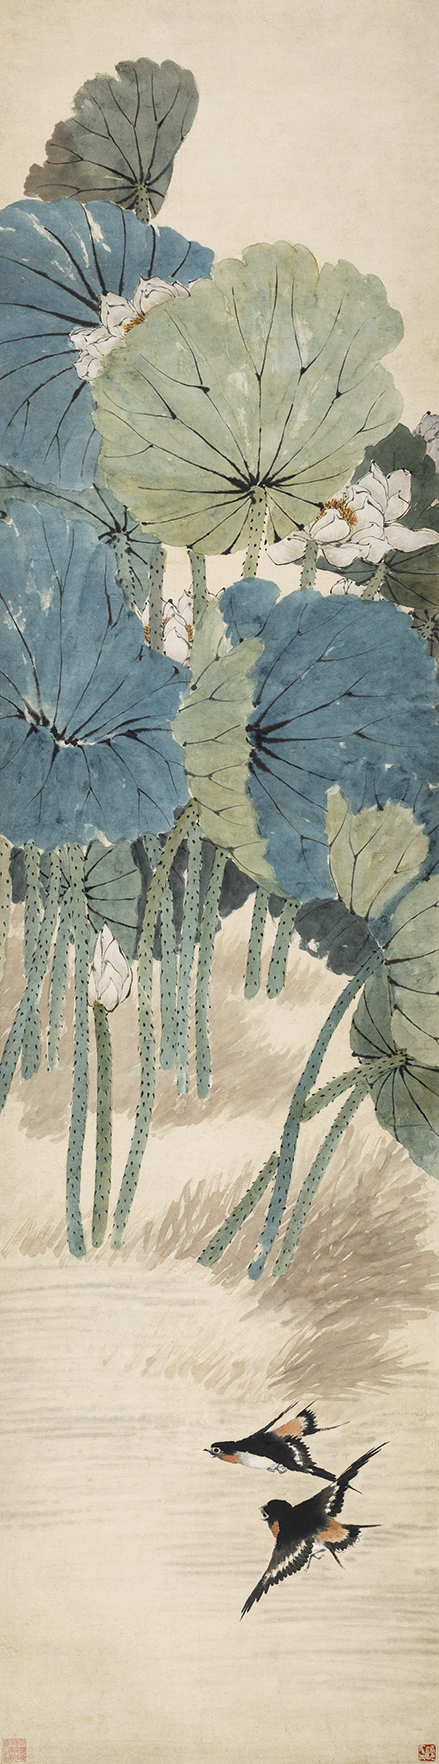 Qing Dynasty, Ren Yi, Lotus and Double Swallows, Scroll, Collection of Zhejiang Provincial Museum, Ink and color on paper, 180.1 cm long, 44.6 cm wide